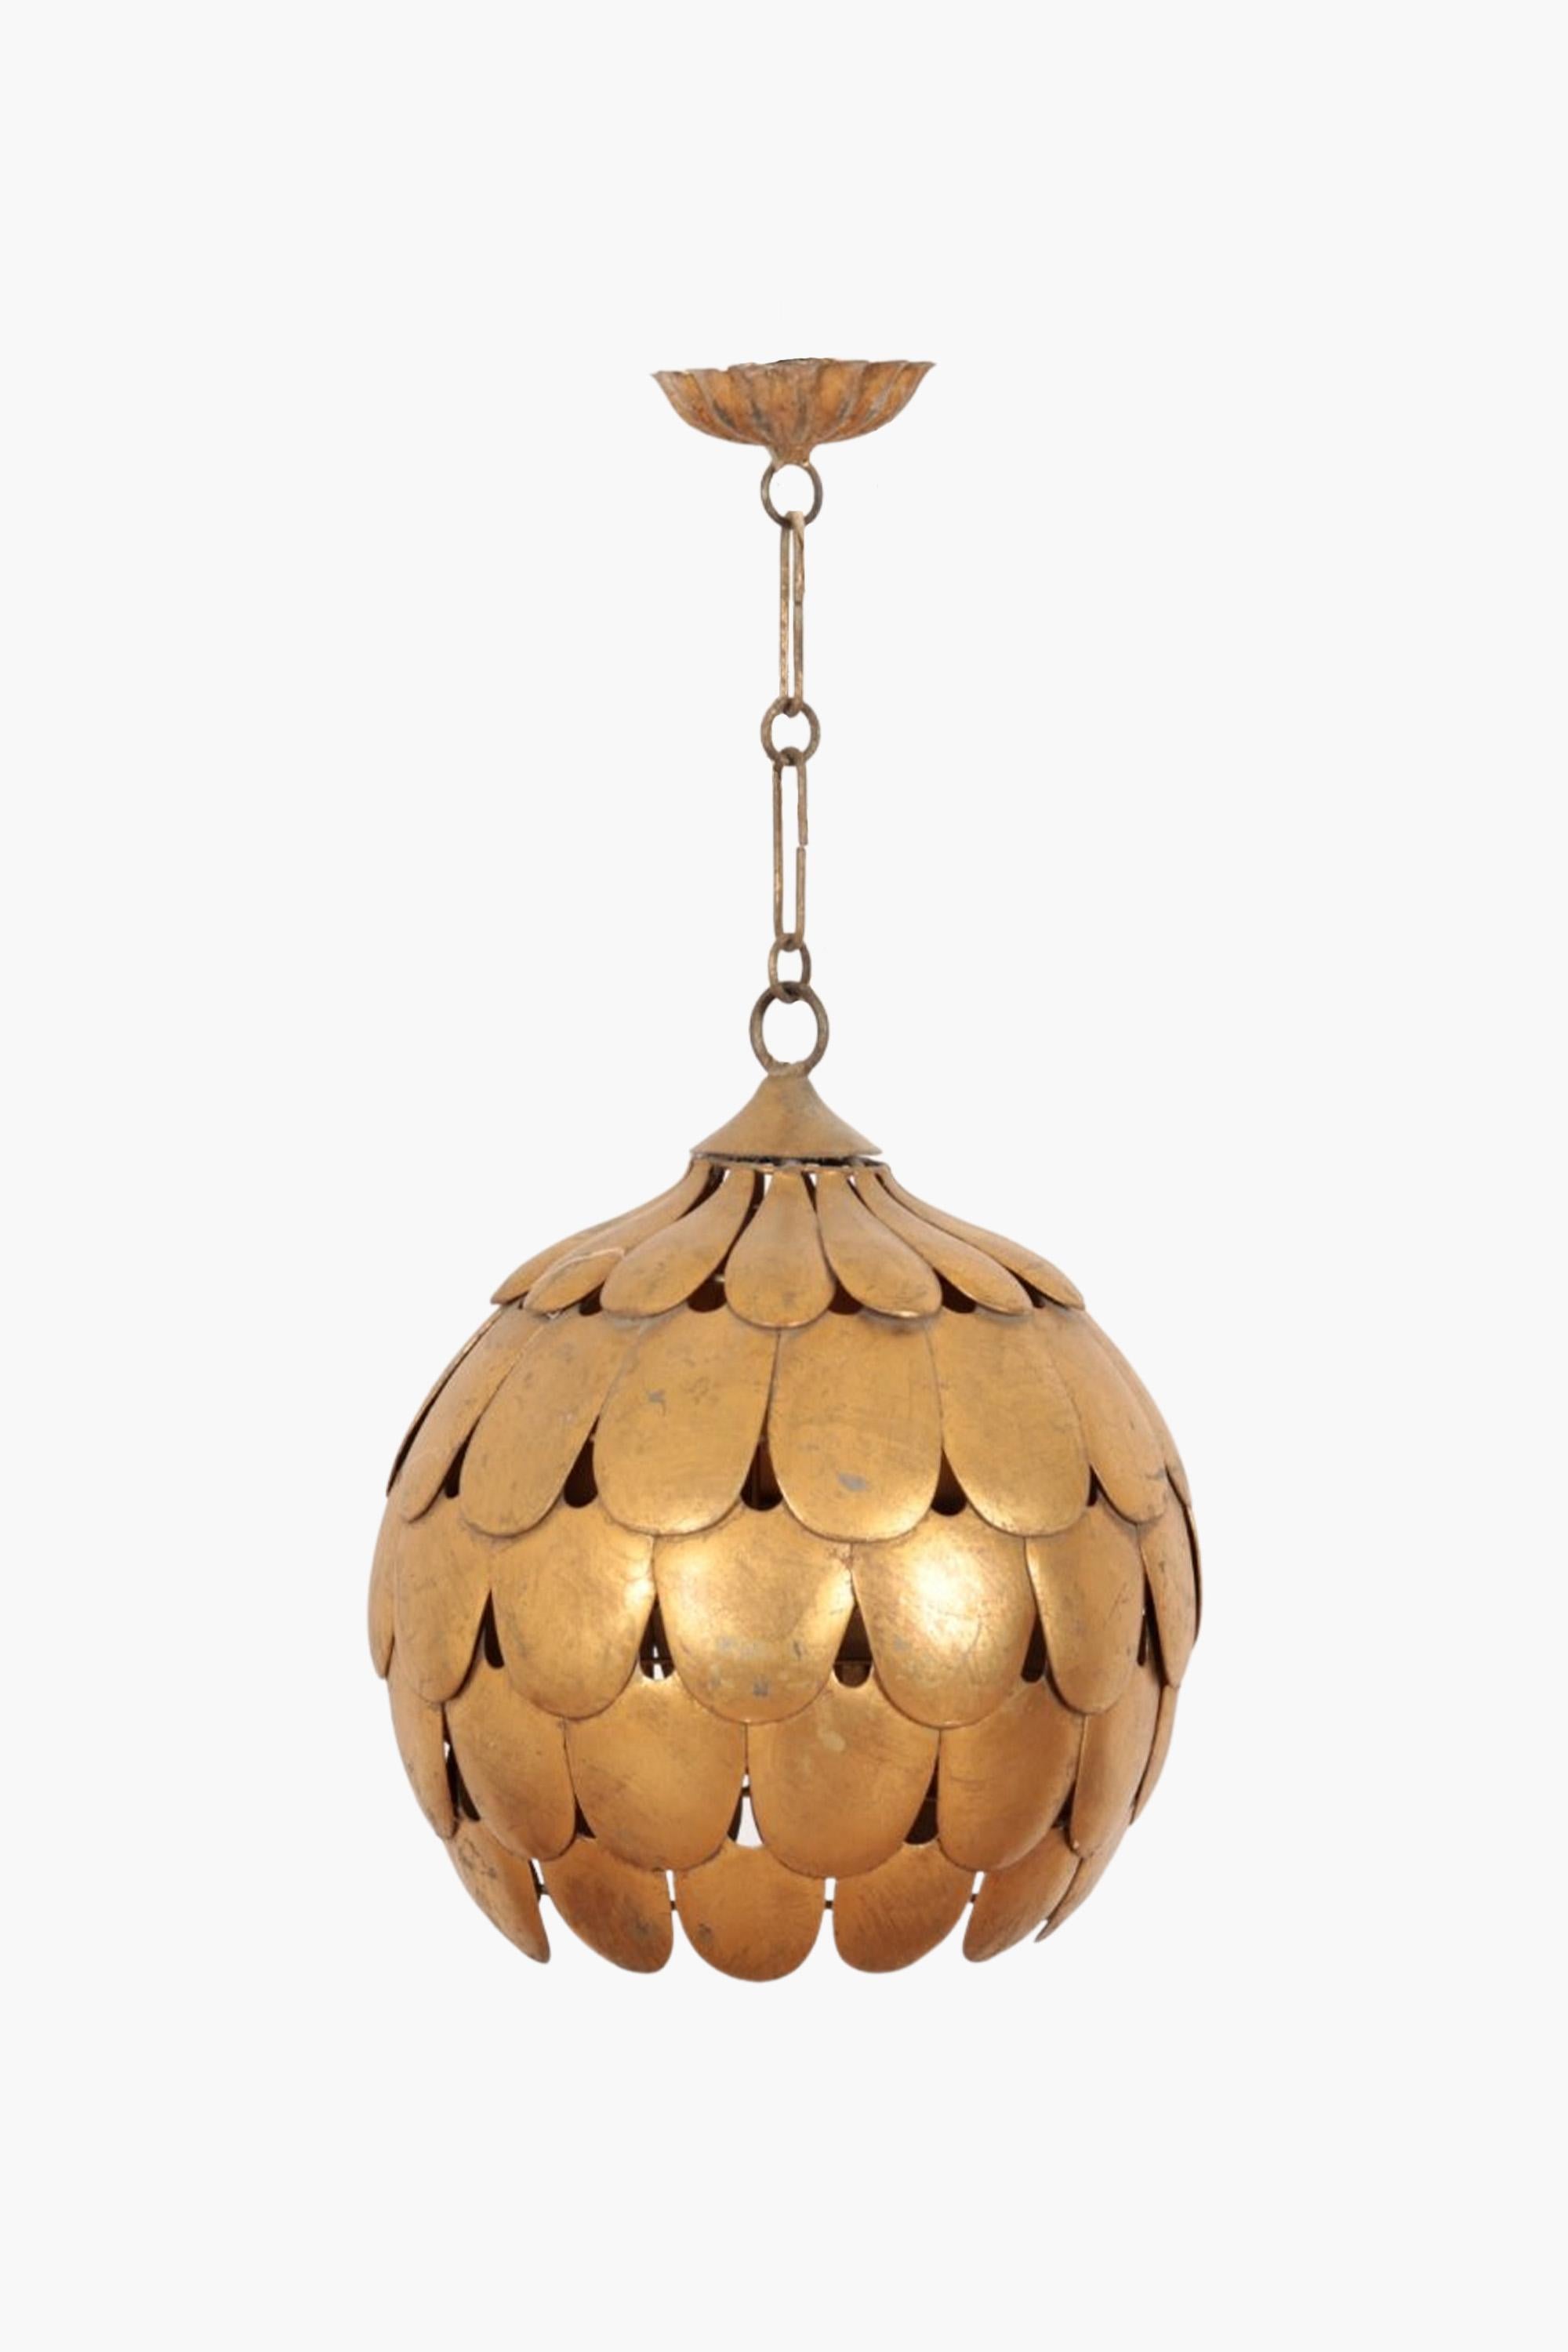 A rare gilt metal pendant lamp by S. Salvadori.

The Salvadori workshop made sculptural furniture and lighting in Florence during the 1950s and 60s. Their whimsical designs often featured wheat sheaf, feather, and vine leaf motifs skilfully wrought